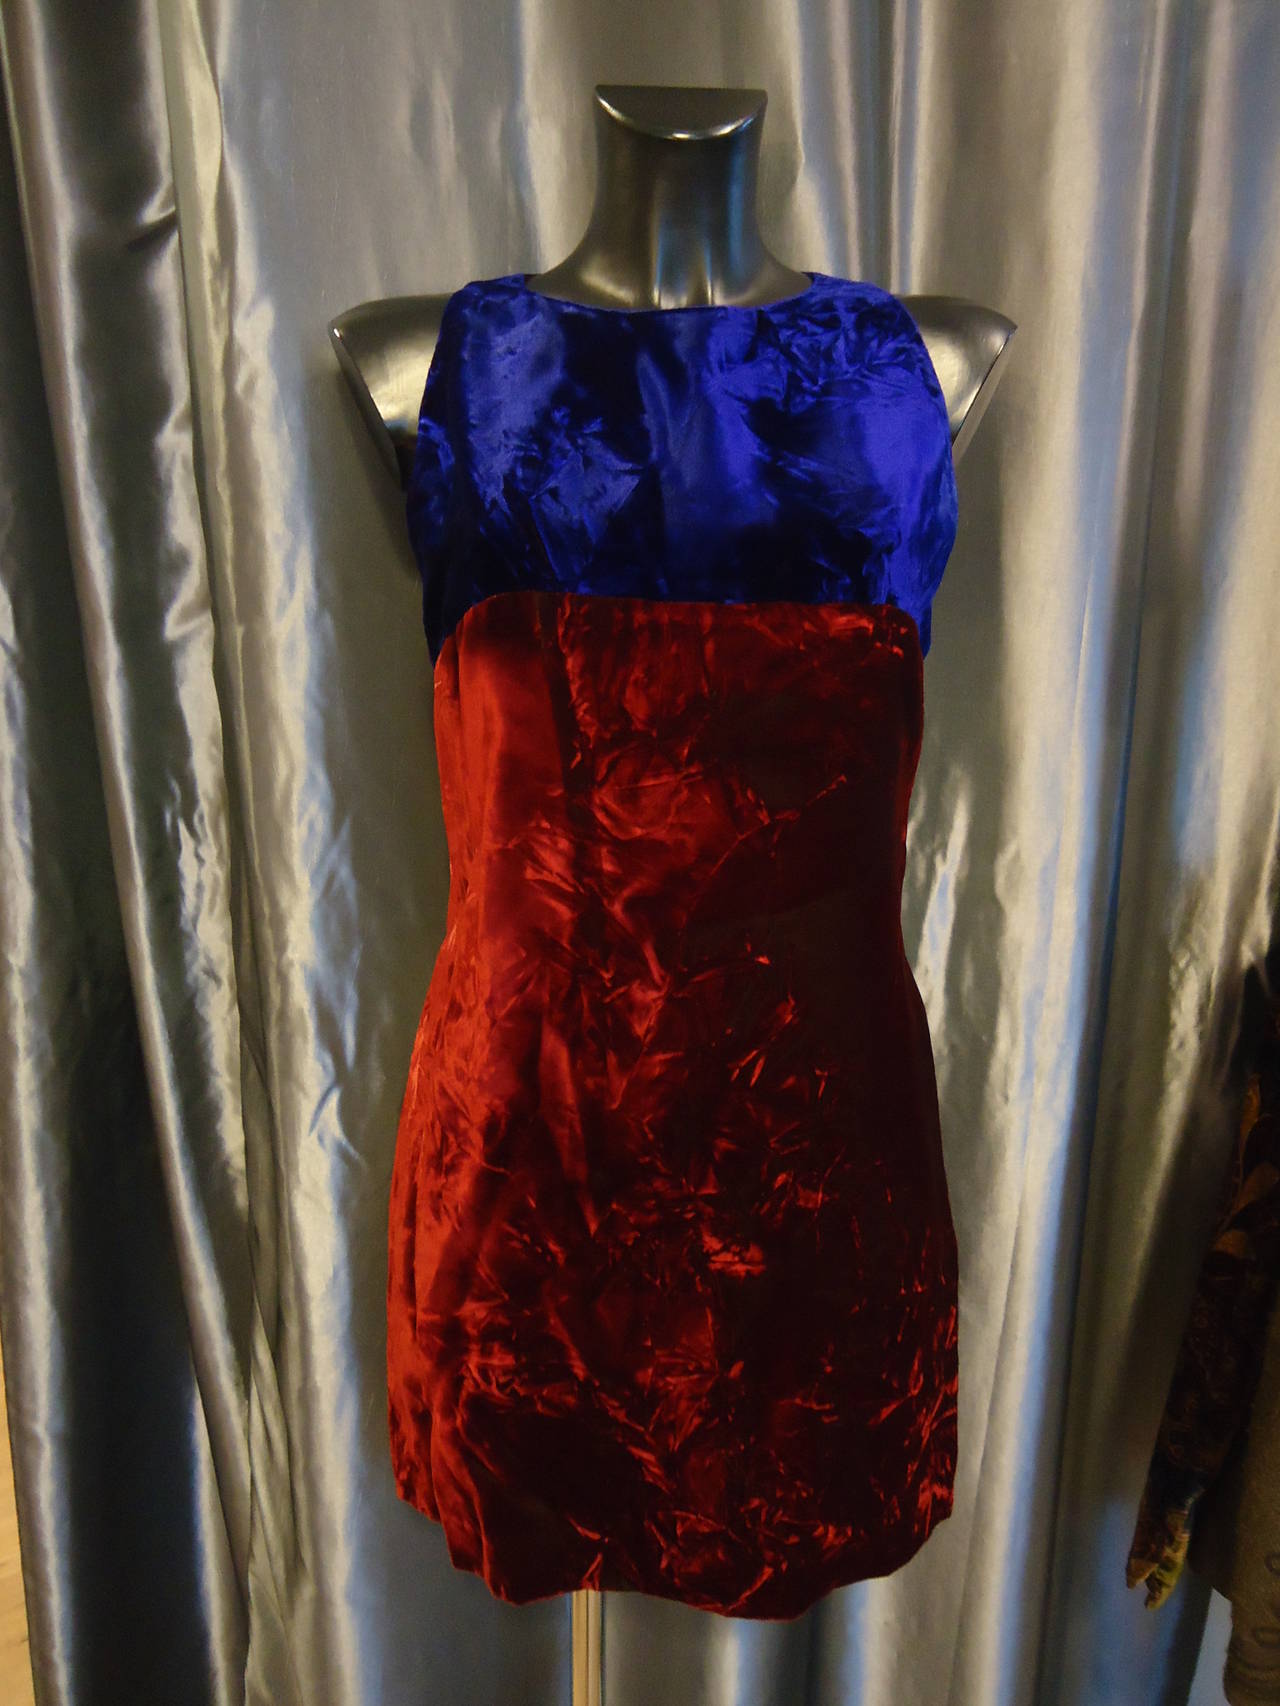 Amazing dress and overcoat suit by Istante, the brand created by the genius of Gianni Versace in 1985
Vintage from the 90's
Beautiful combination of fantastic colors, blue and red with mervellous shades
The dress is sleeveless while the overcoat